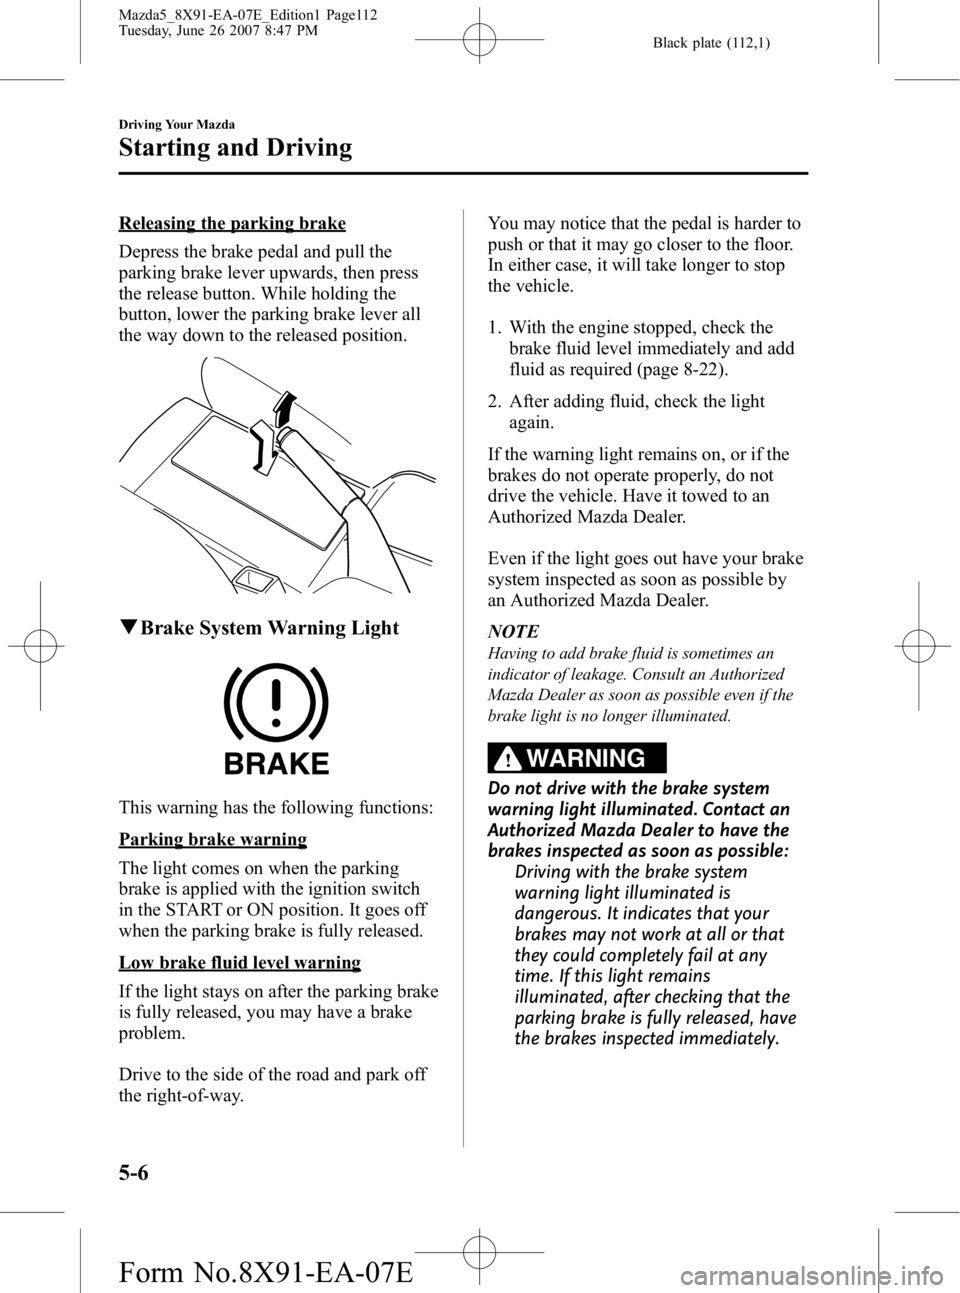 MAZDA MODEL 5 2007  Owners Manual Black plate (112,1)
Releasing the parking brake
Depress the brake pedal and pull the
parking brake lever upwards, then press
the release button. While holding the
button, lower the parking brake lever